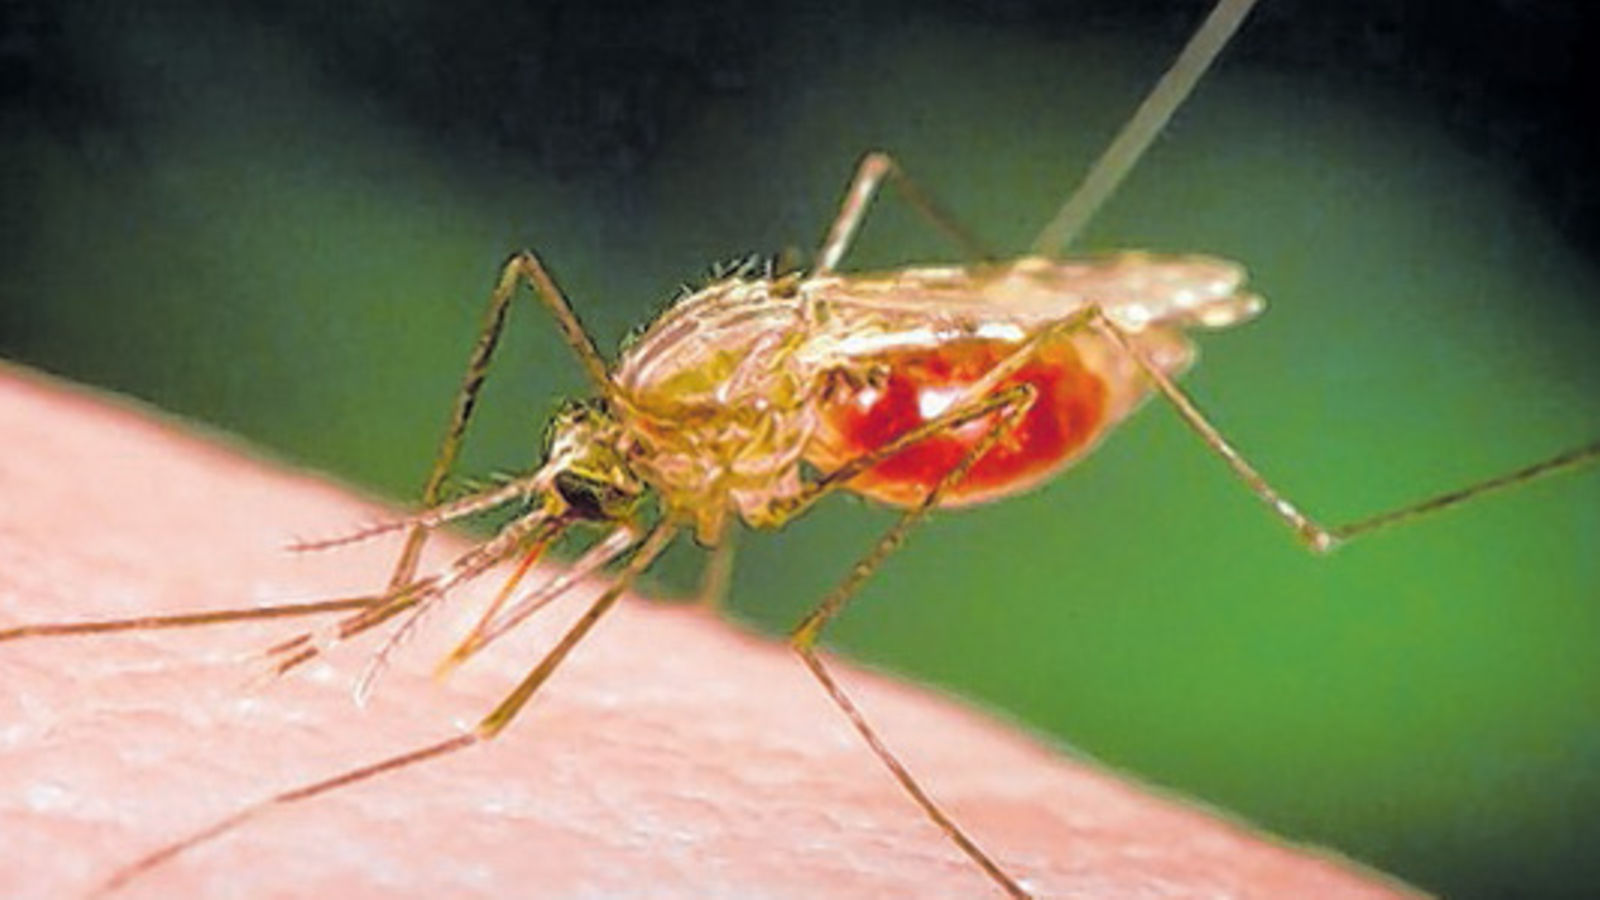 MALARIA: Modern interventions targeting shifts in mosquito biting times